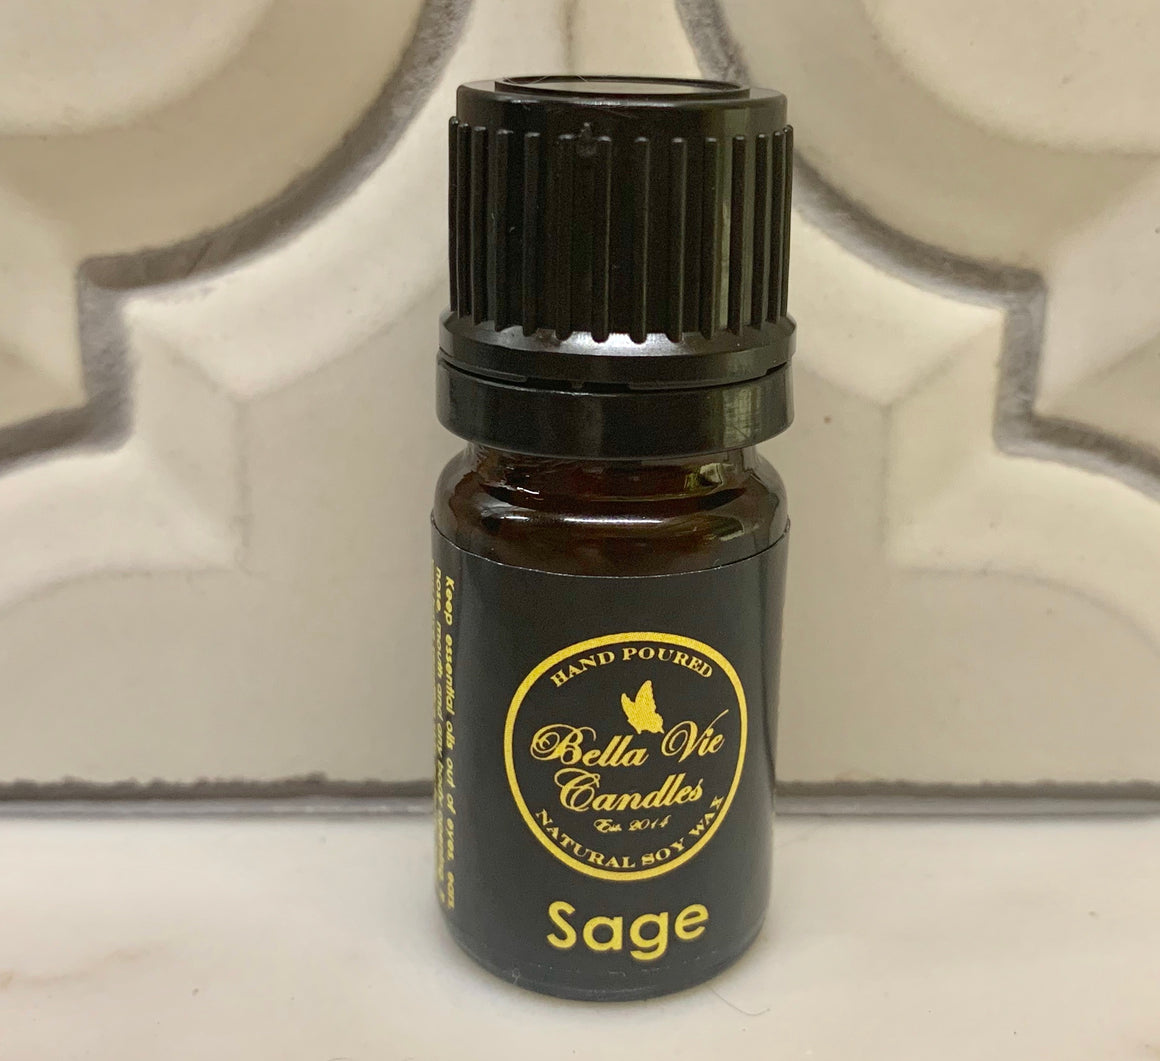 Clary Sage  Essential Oil